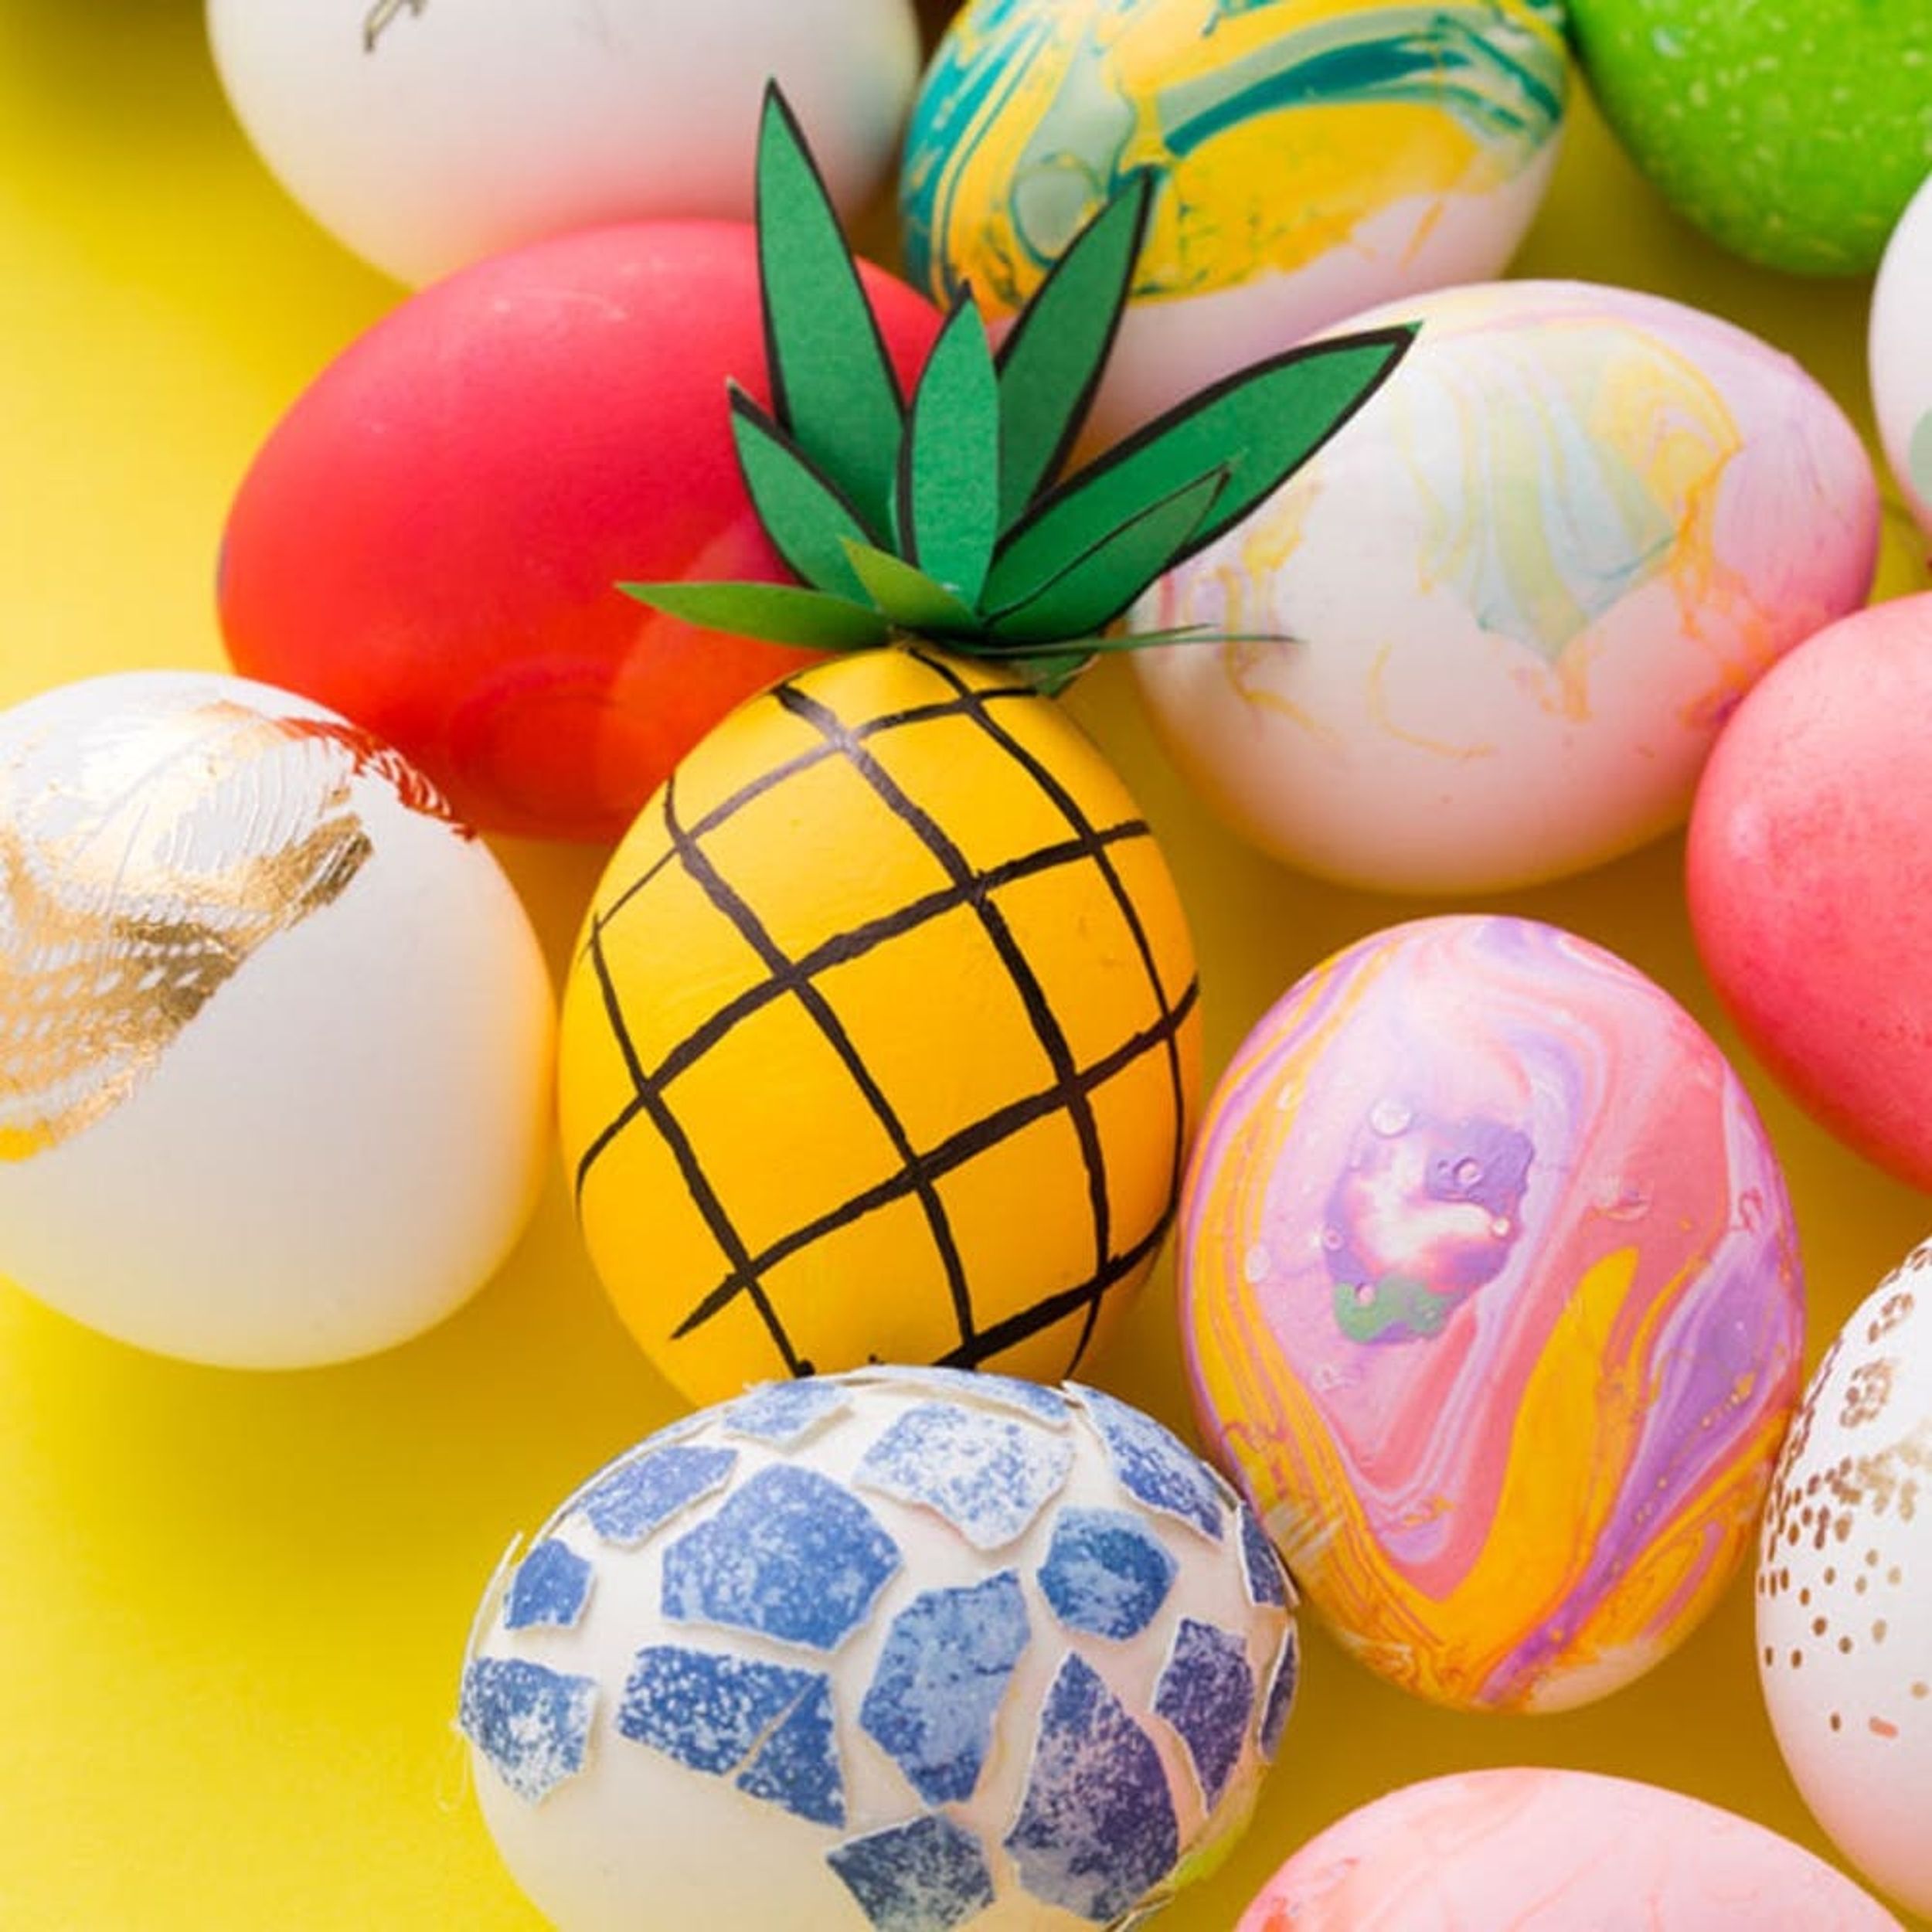 32 Easter Egg Decorating Ideas You NEED This Year